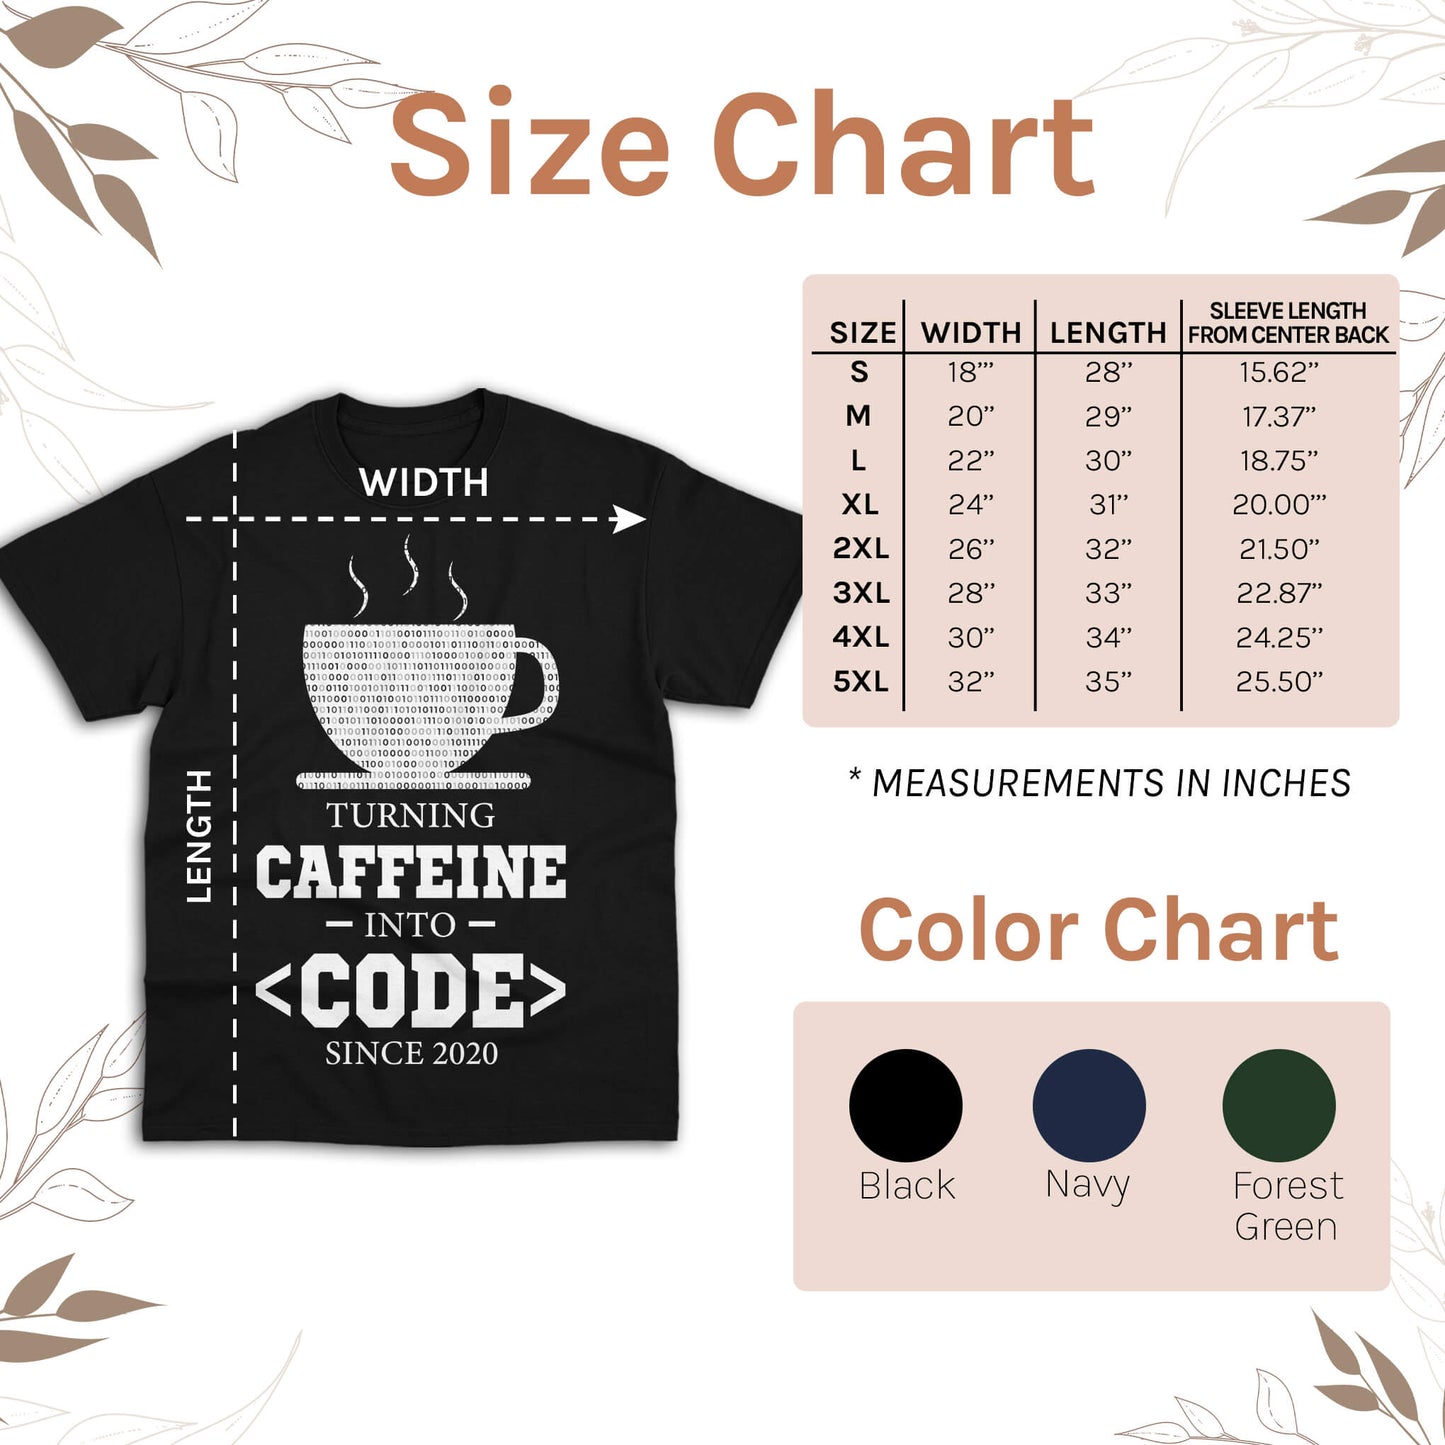 Turning caffeine into code - Personalized Birthday gift for Software Engineer - Custom Tshirt - MyMindfulGifts